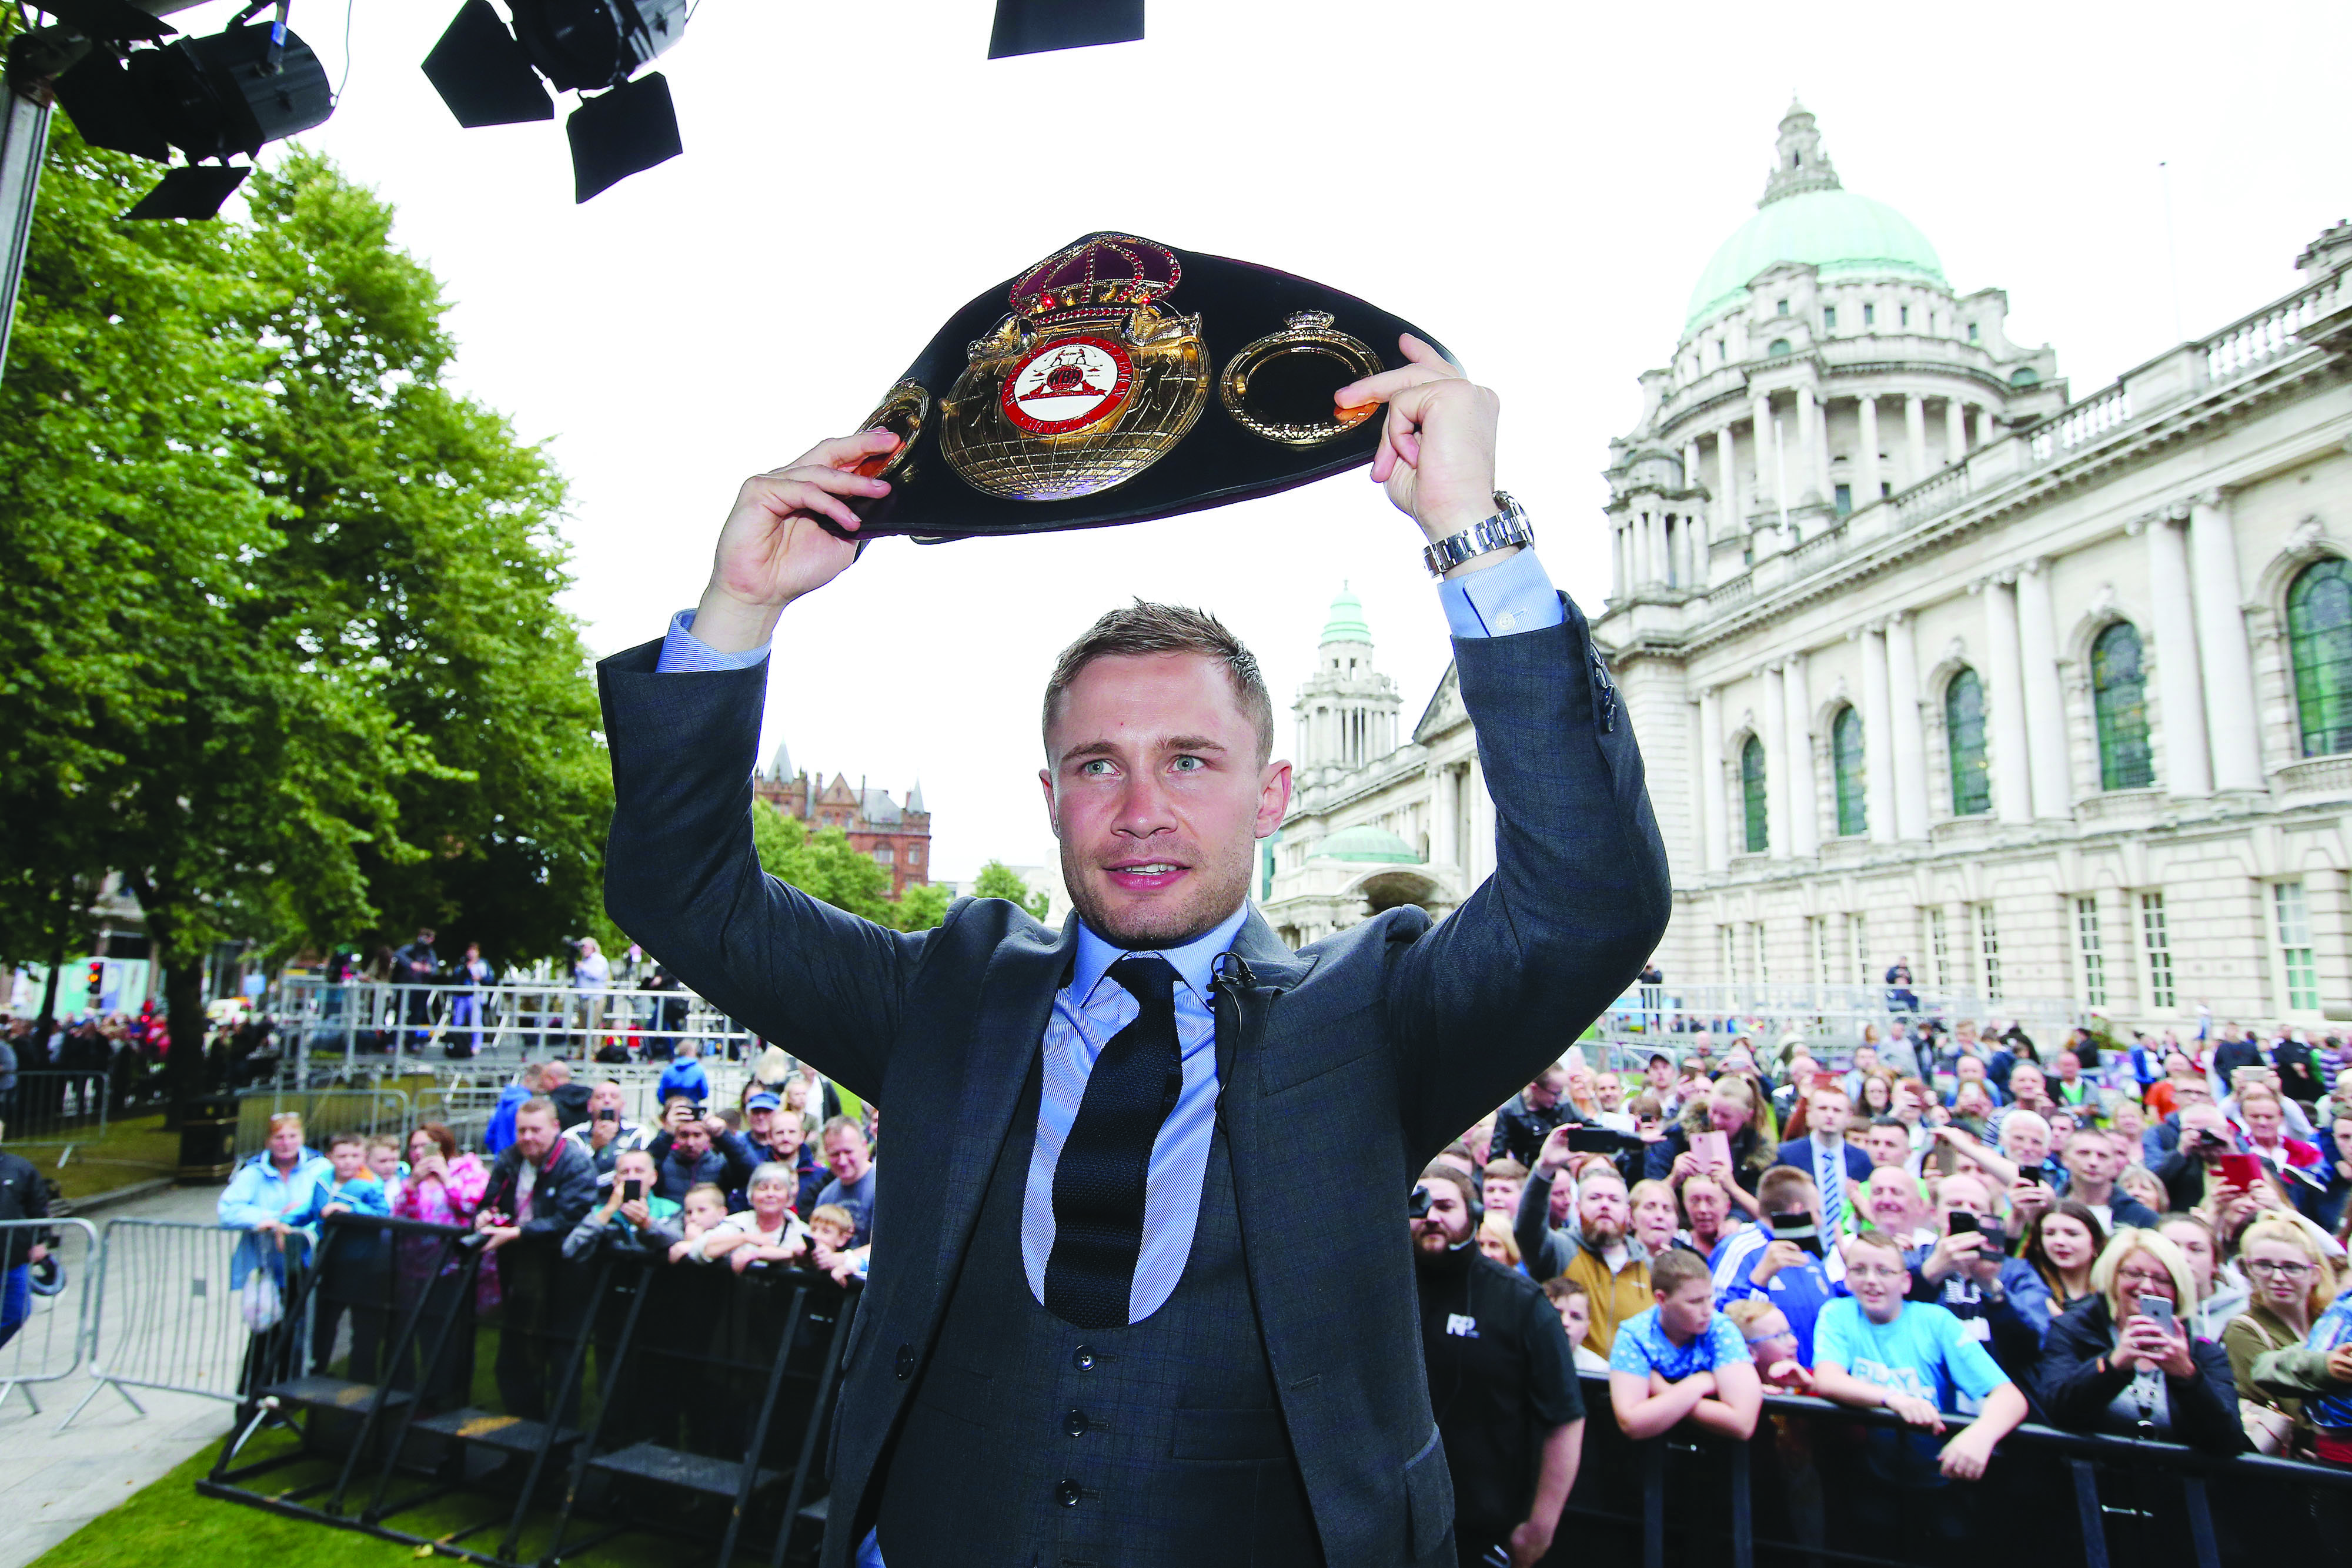 Carl Frampton shows off the WBA featherweight title belt he won in New York on July 30